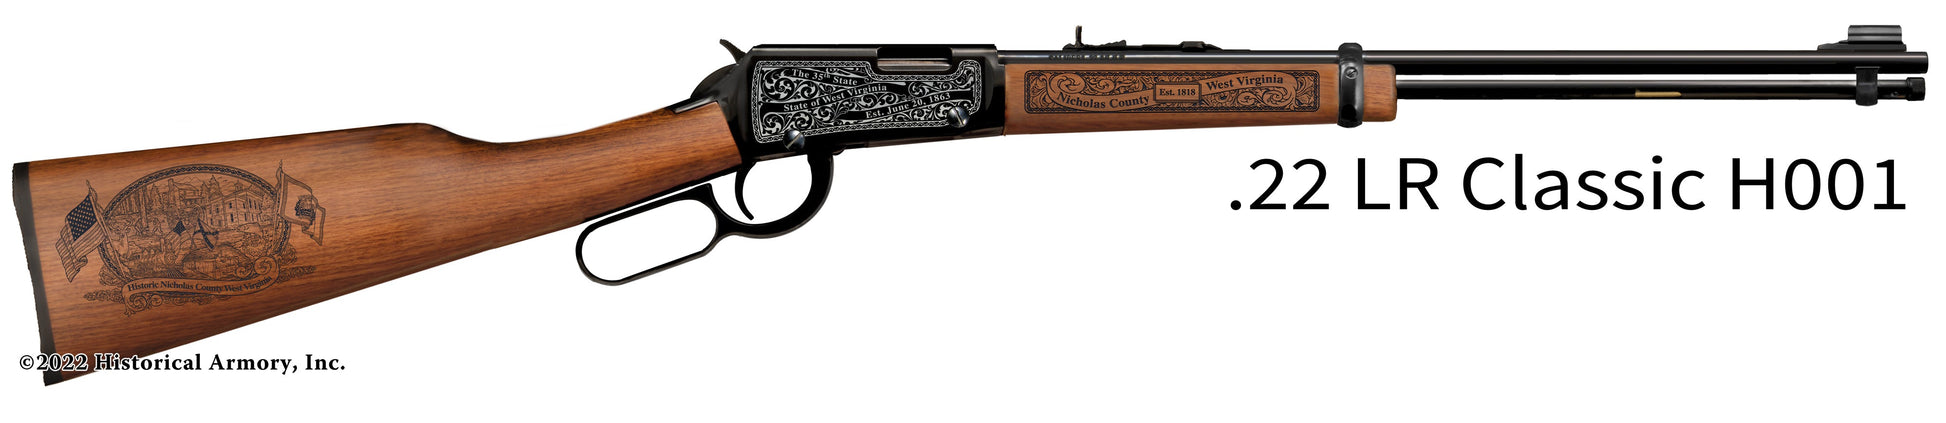 Nicholas County West Virginia Engraved Henry H001 Rifle